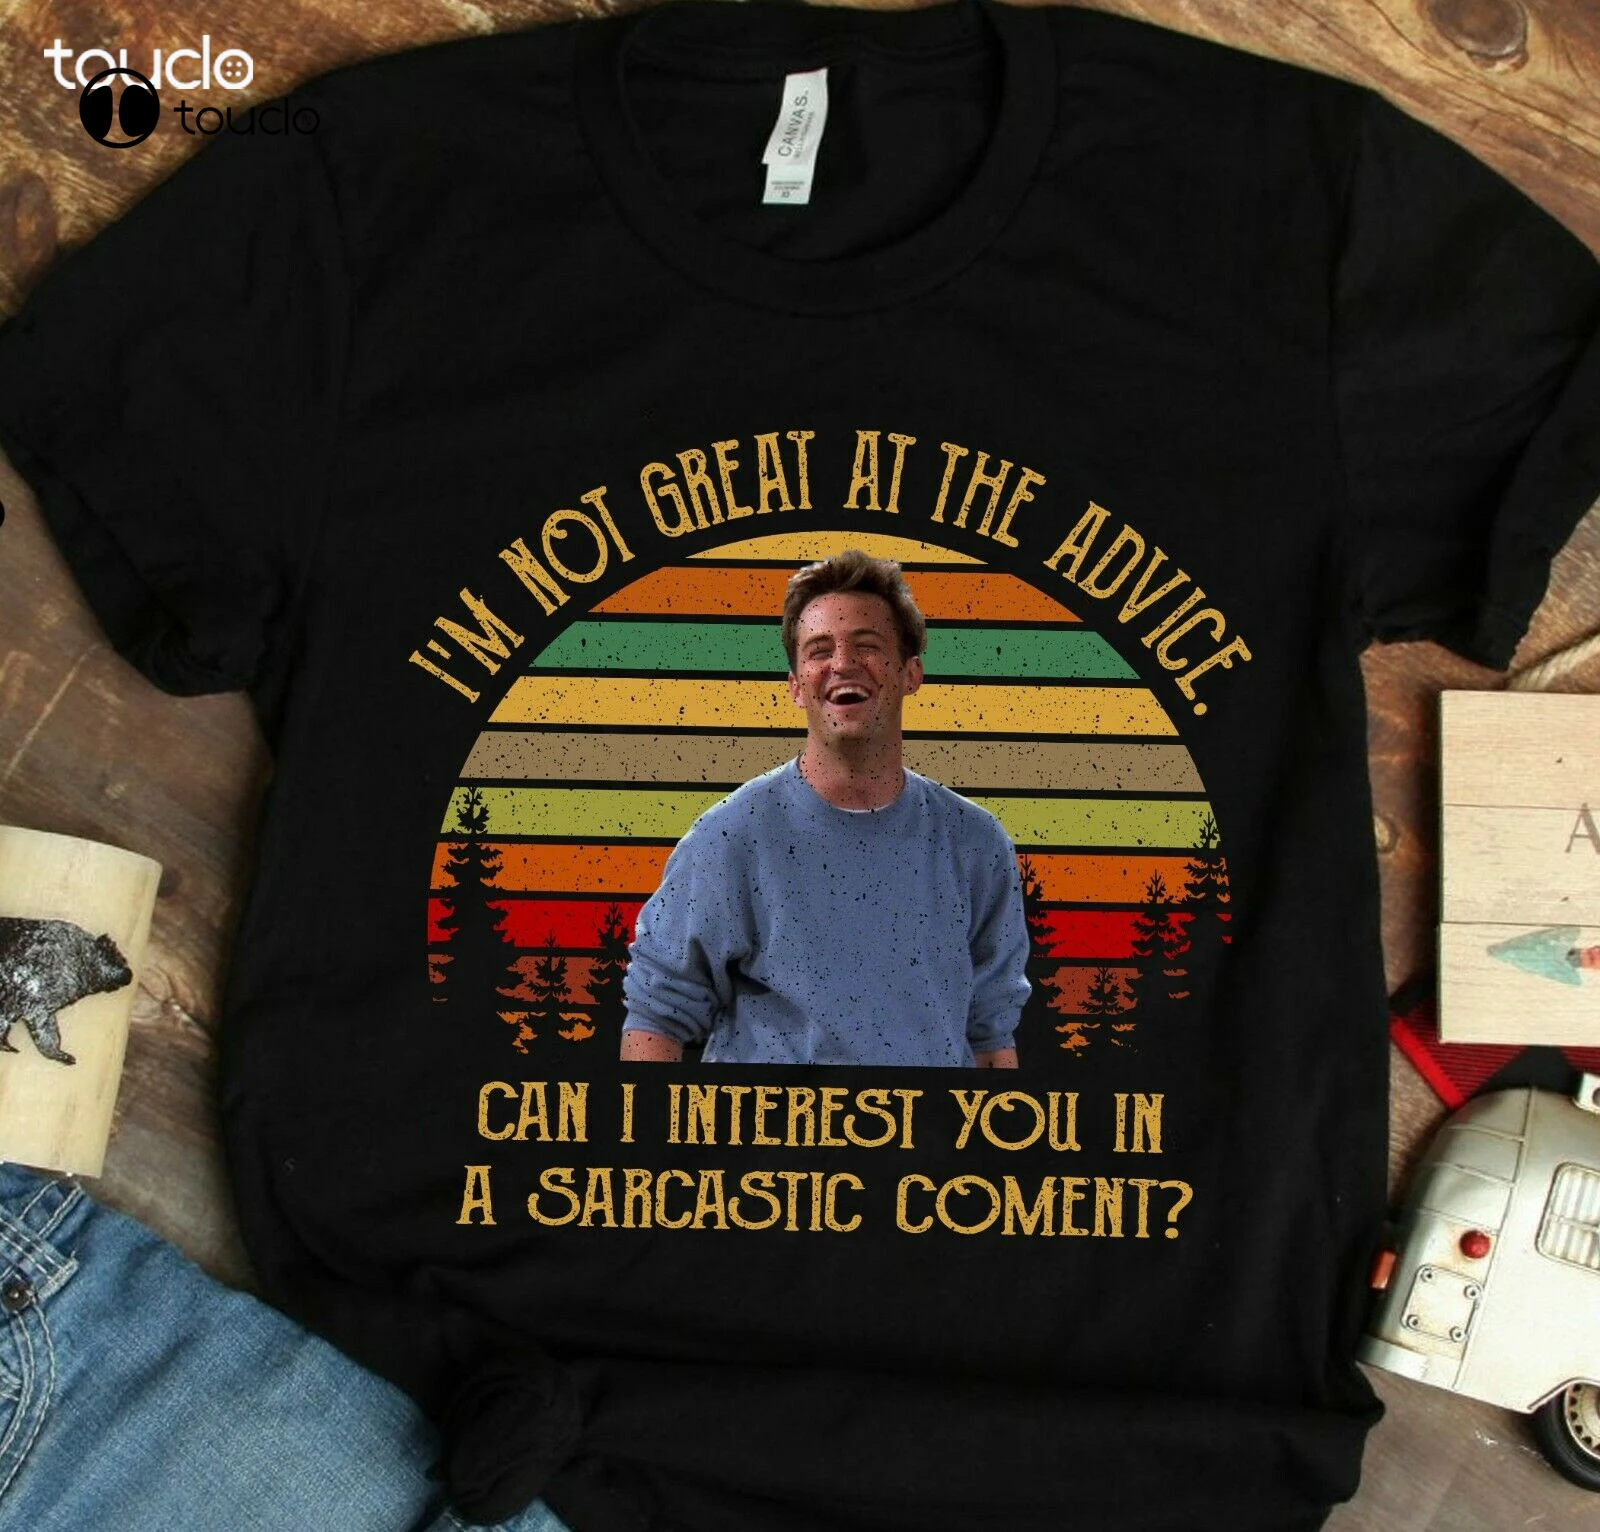 

I'M Not Great At The Advice Shirt Vintage Chandler Bing Friends T-Shirt Xs-5Xl Custom Aldult Teen Unisex Fashion Funny New